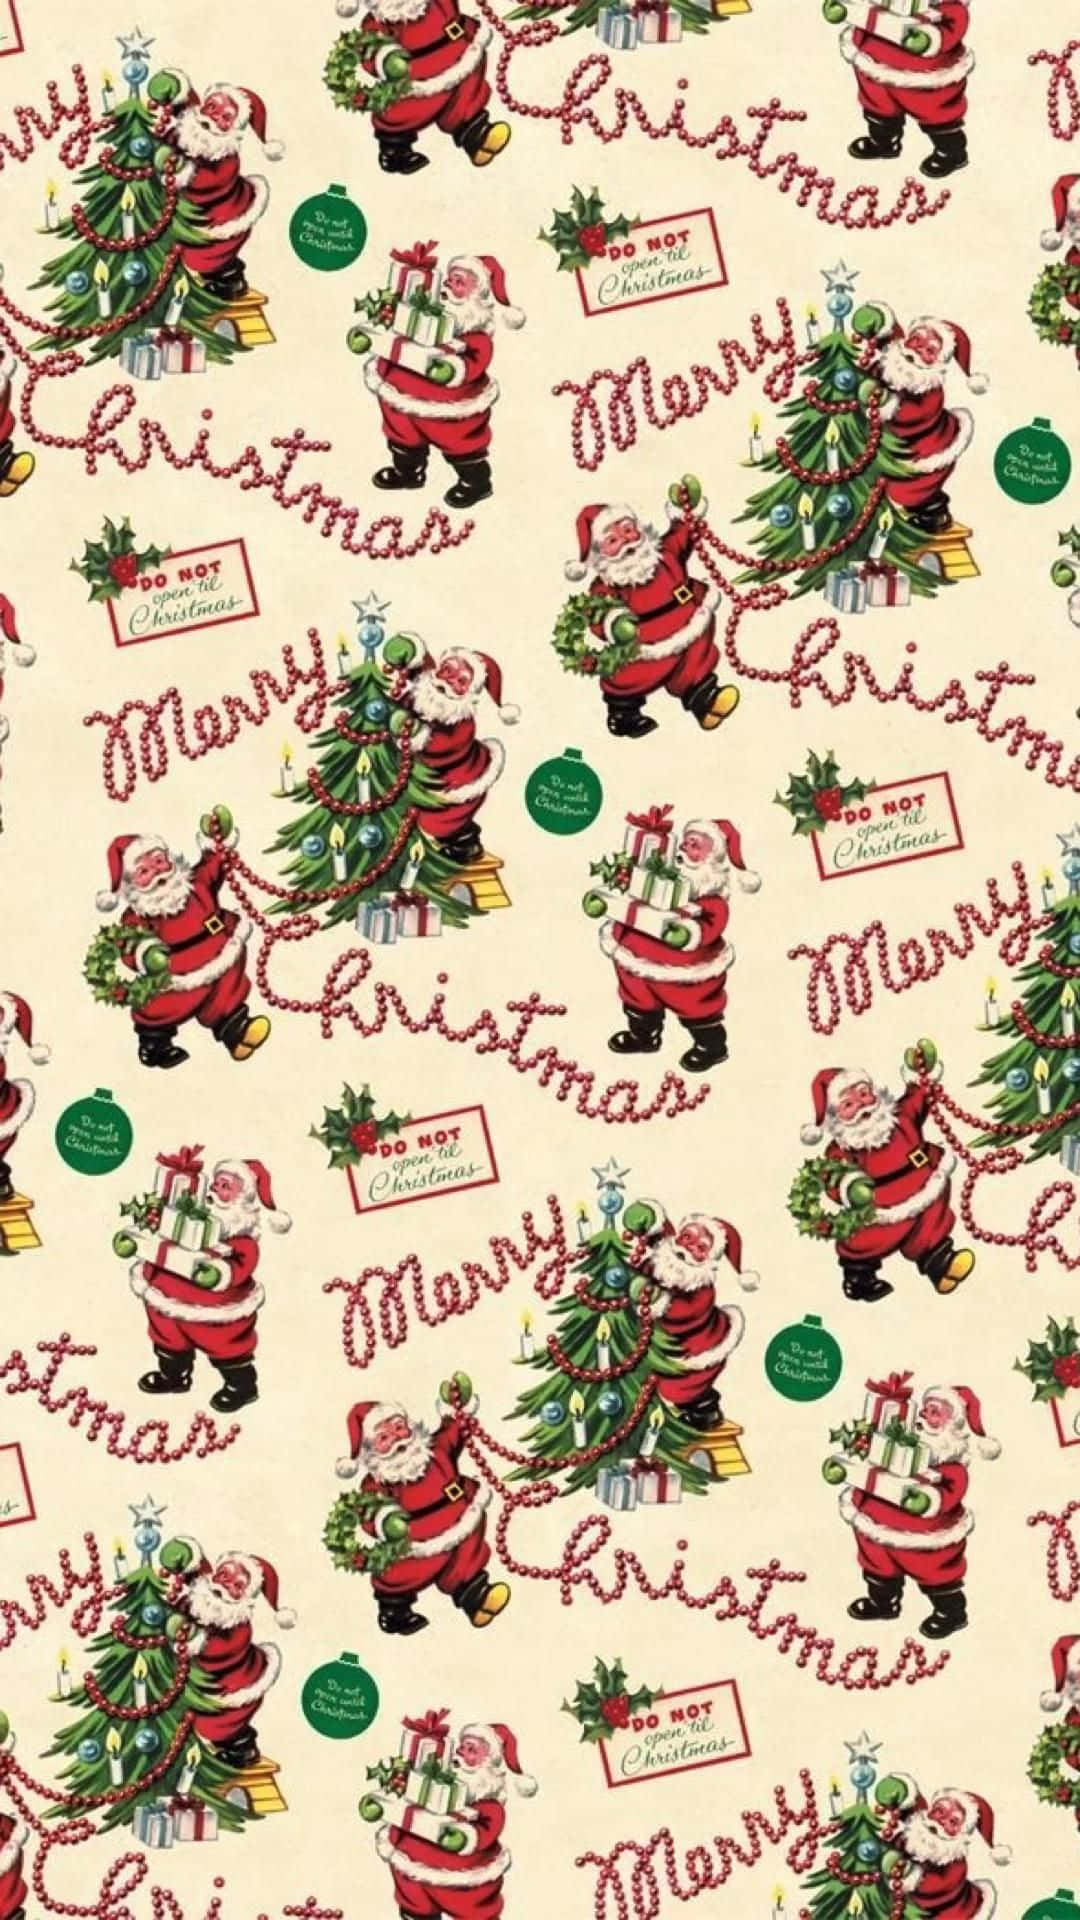 25 Christmas Wallpapers for iPhone  Cute and Vintage Backgrounds  Christmas  wallpaper free Christmas phone wallpaper Christmas wallpaper